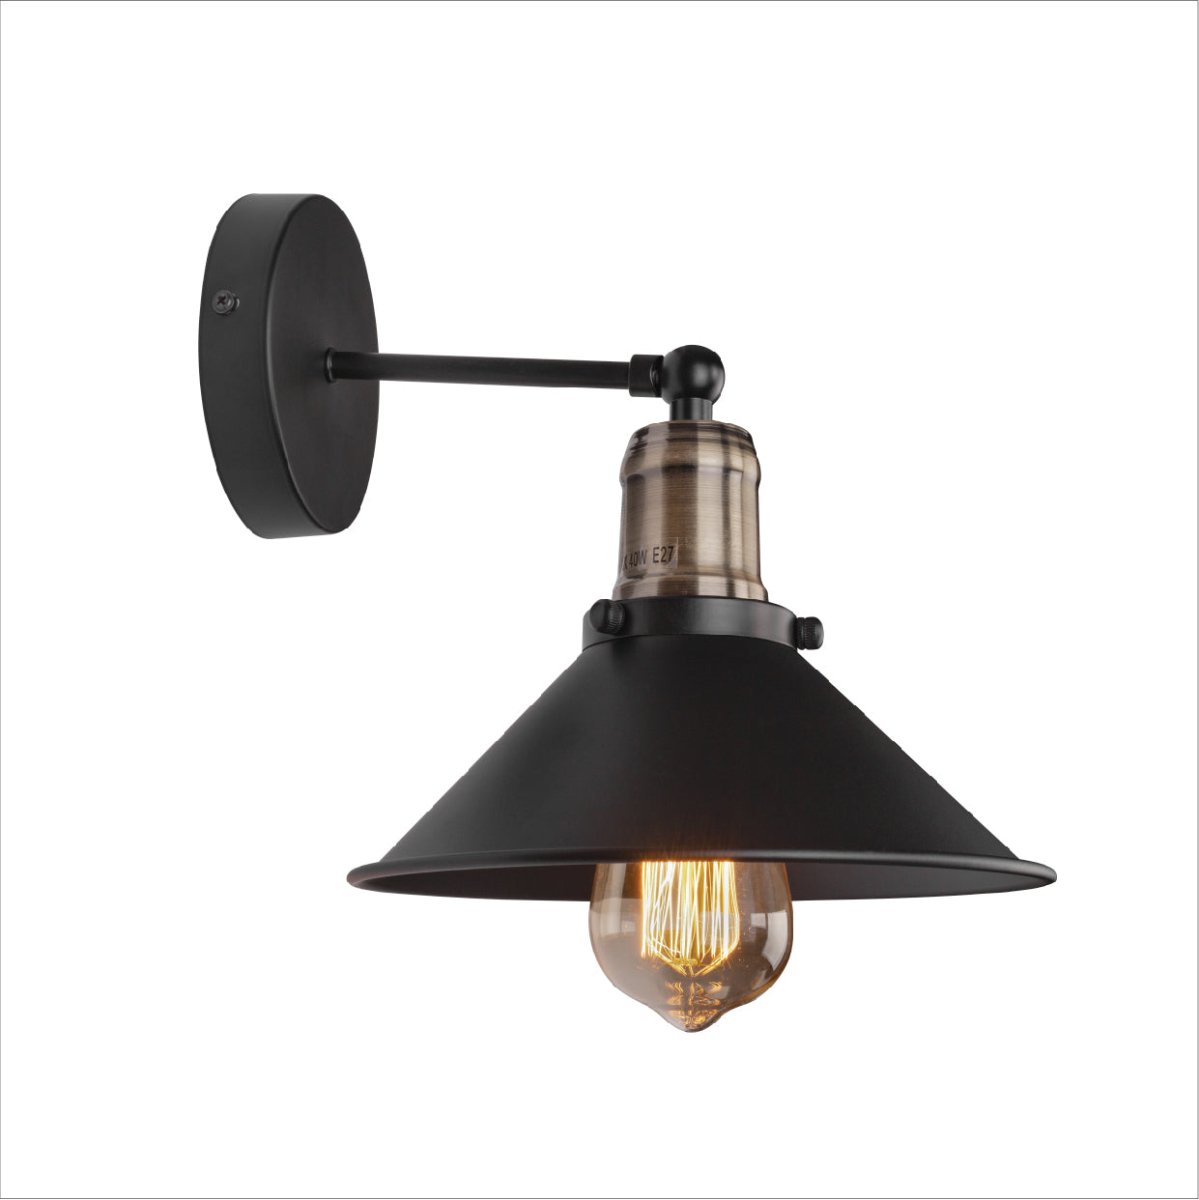 Main image of Black Funnel Metal Hinged Wall Light with E27 Fitting | TEKLED 151-19558